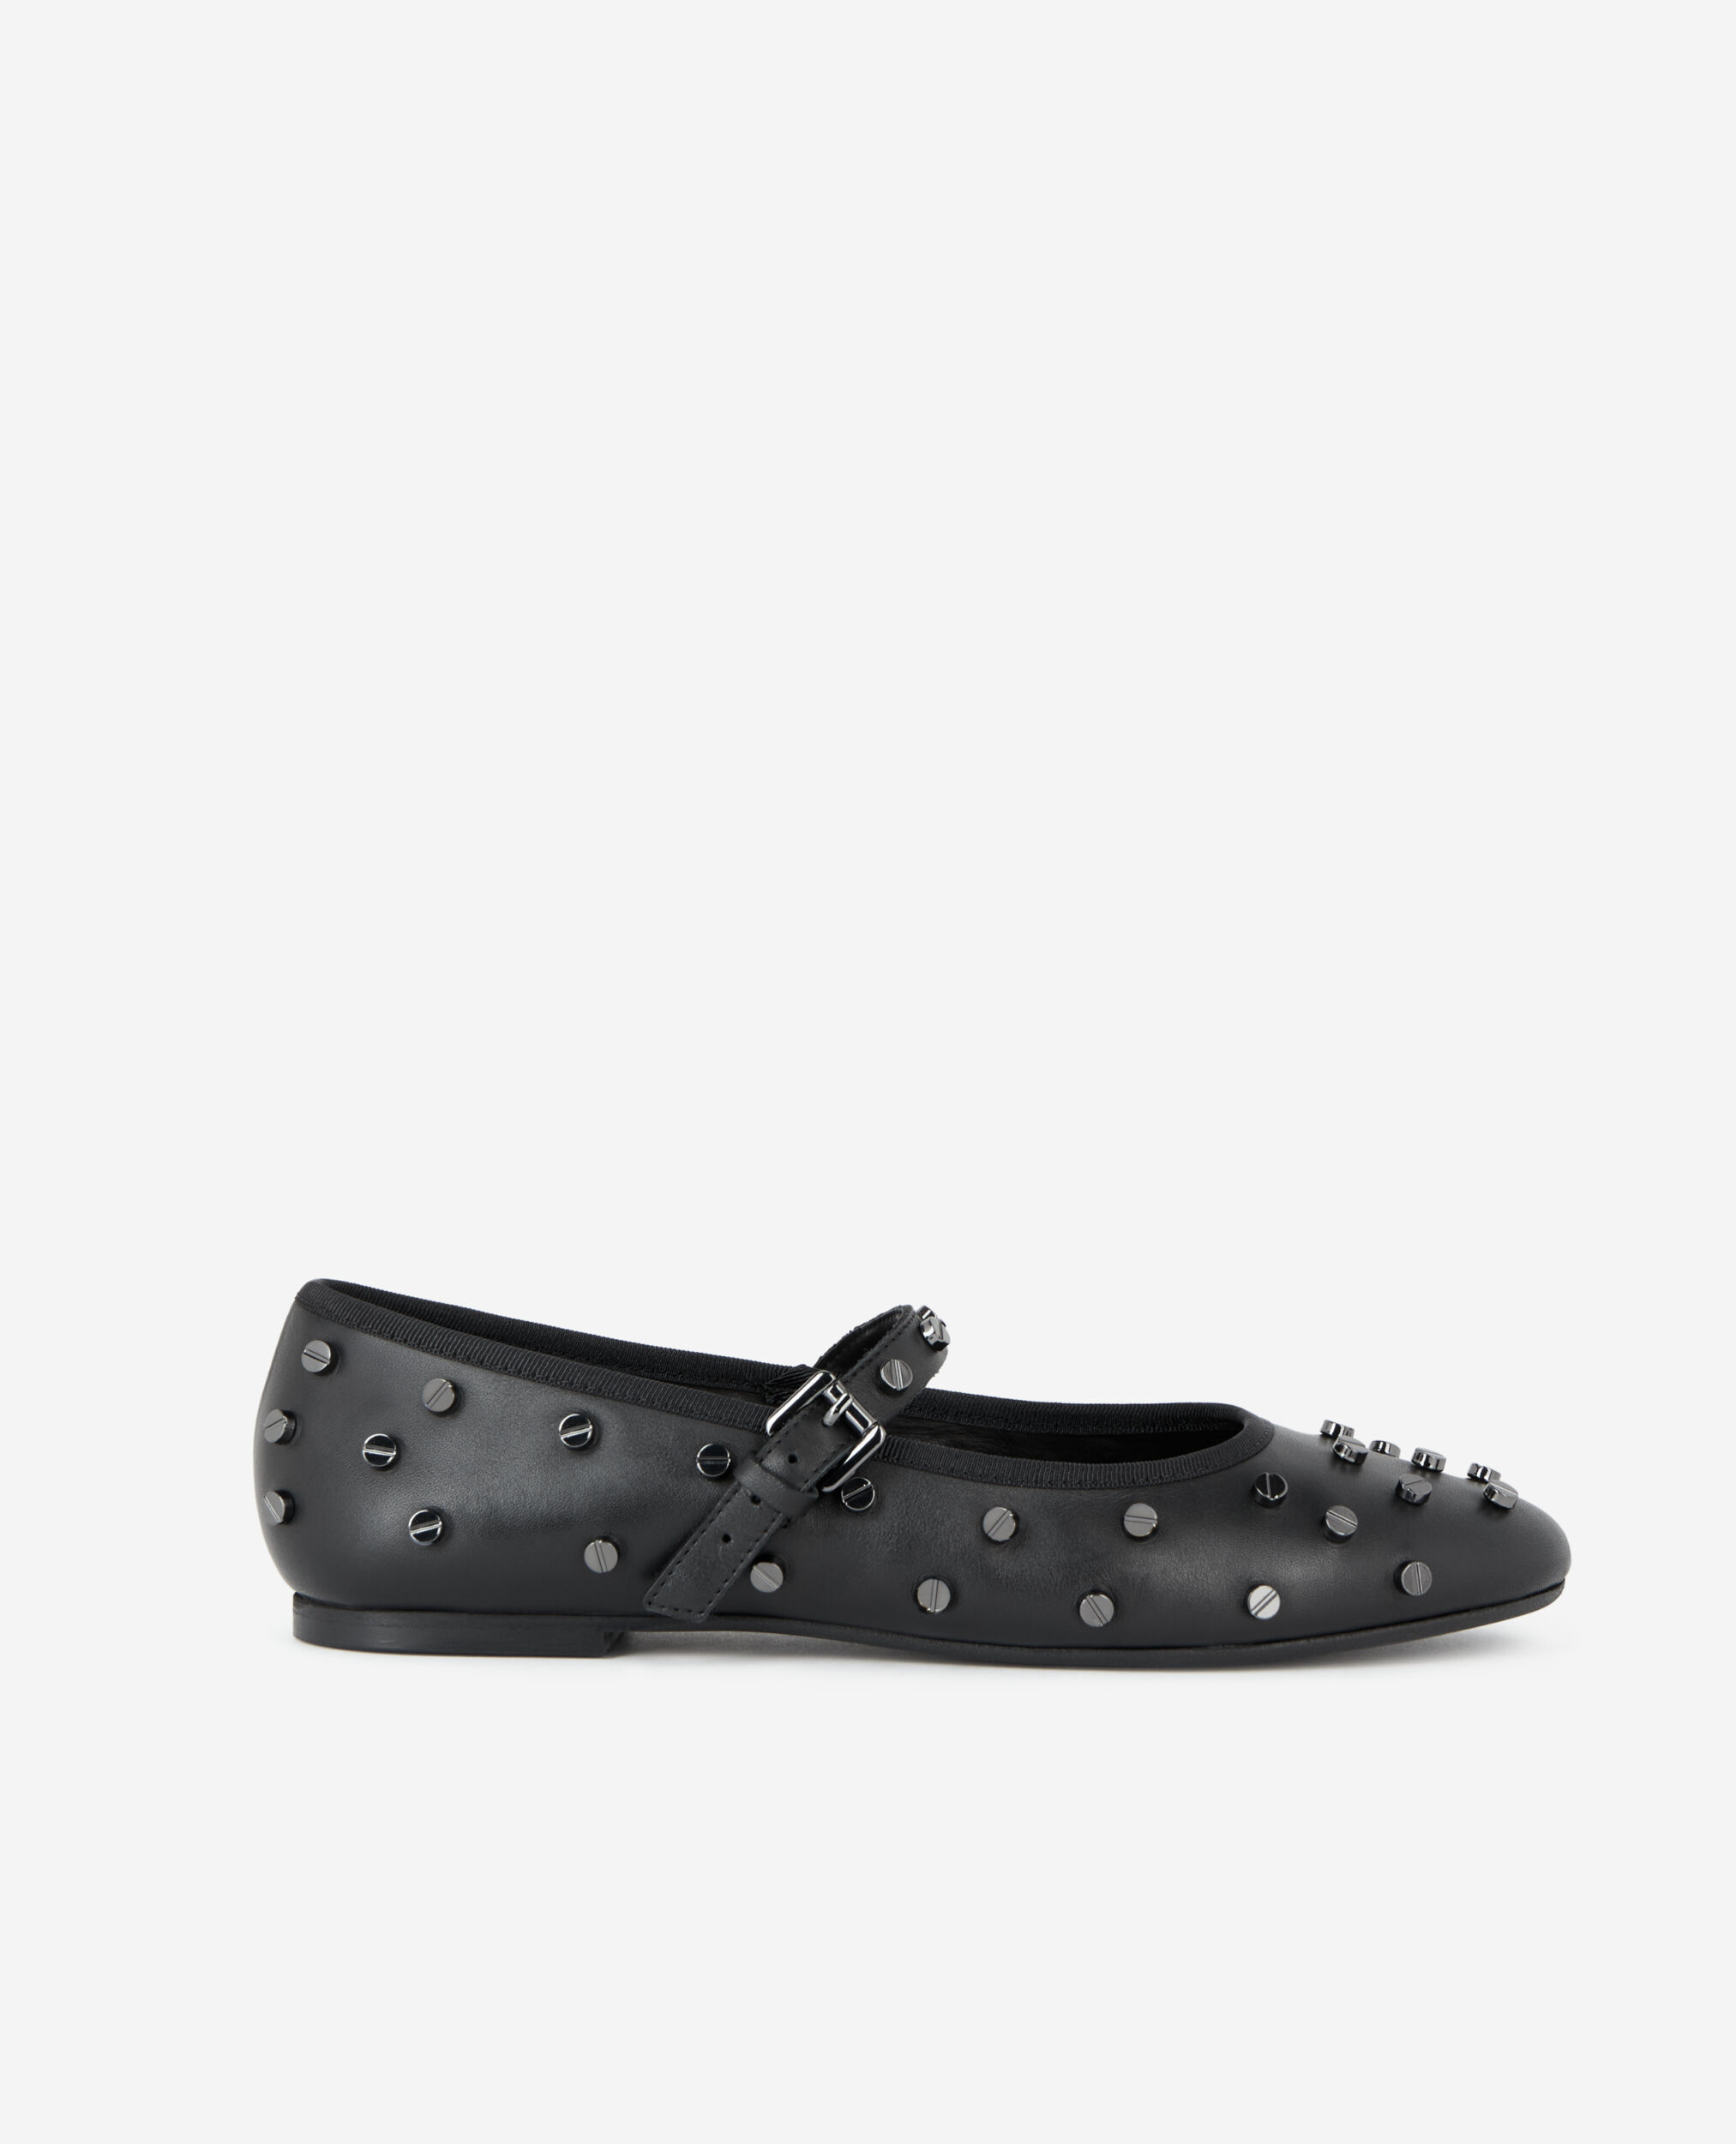 Black leather ballerinas with studs, BLACK, hi-res image number null